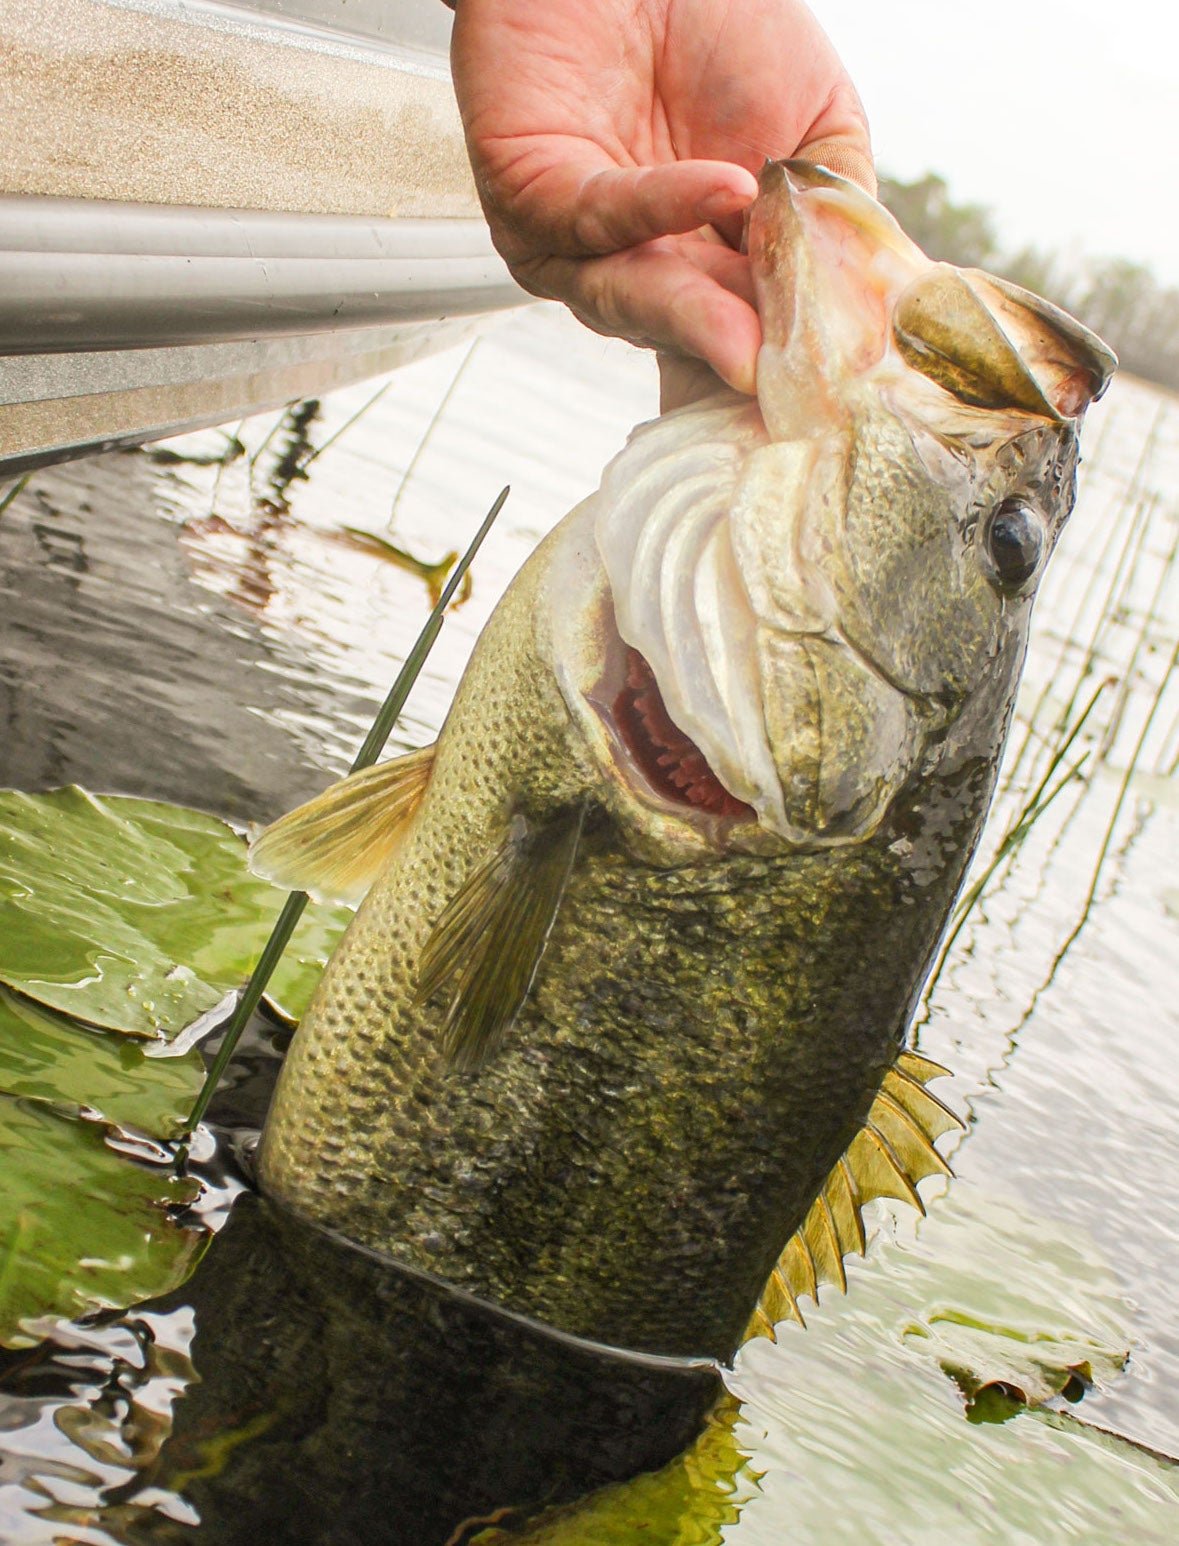 An angler lands a nice largemouth bass at boatside from a patch of lily pads